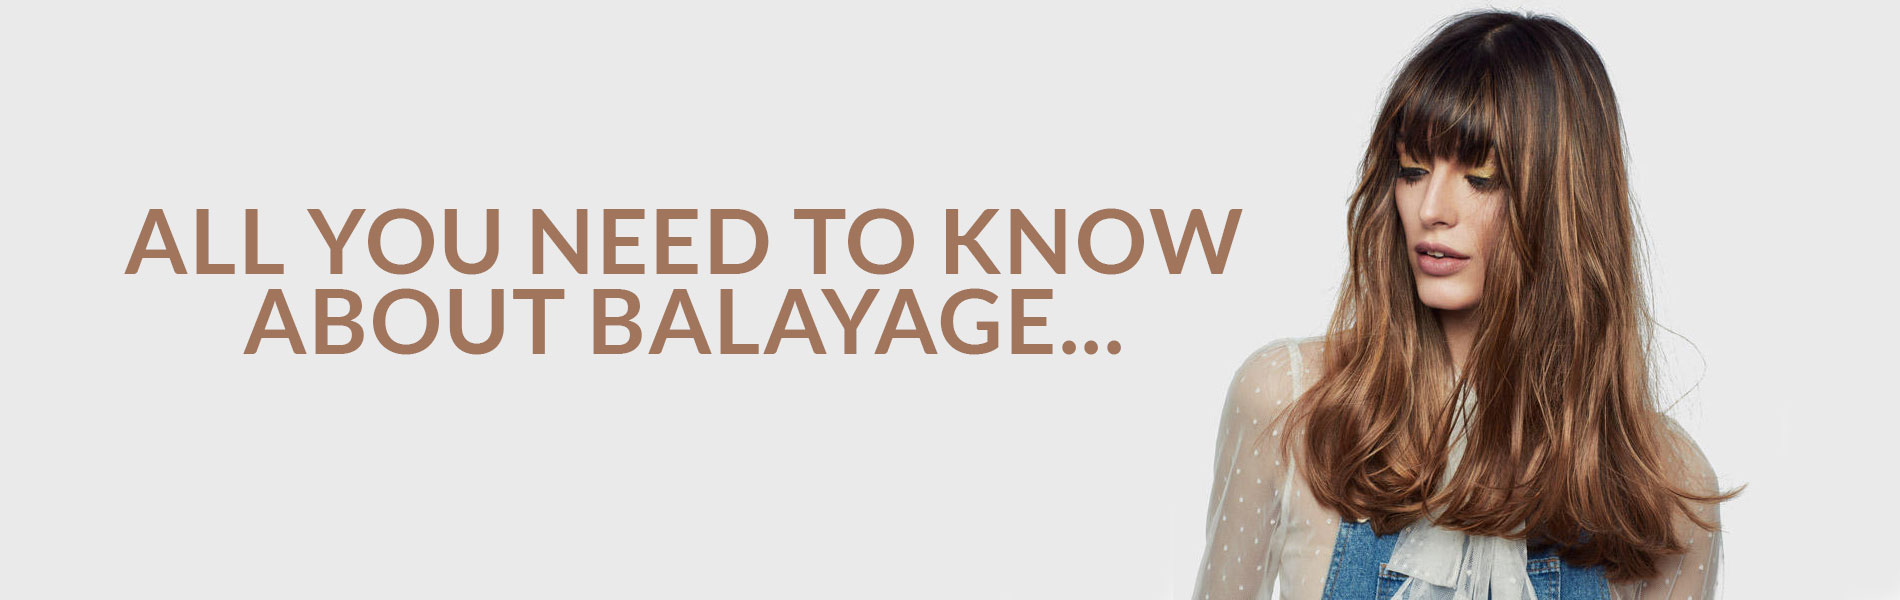 All You Need To Know About Balayage...